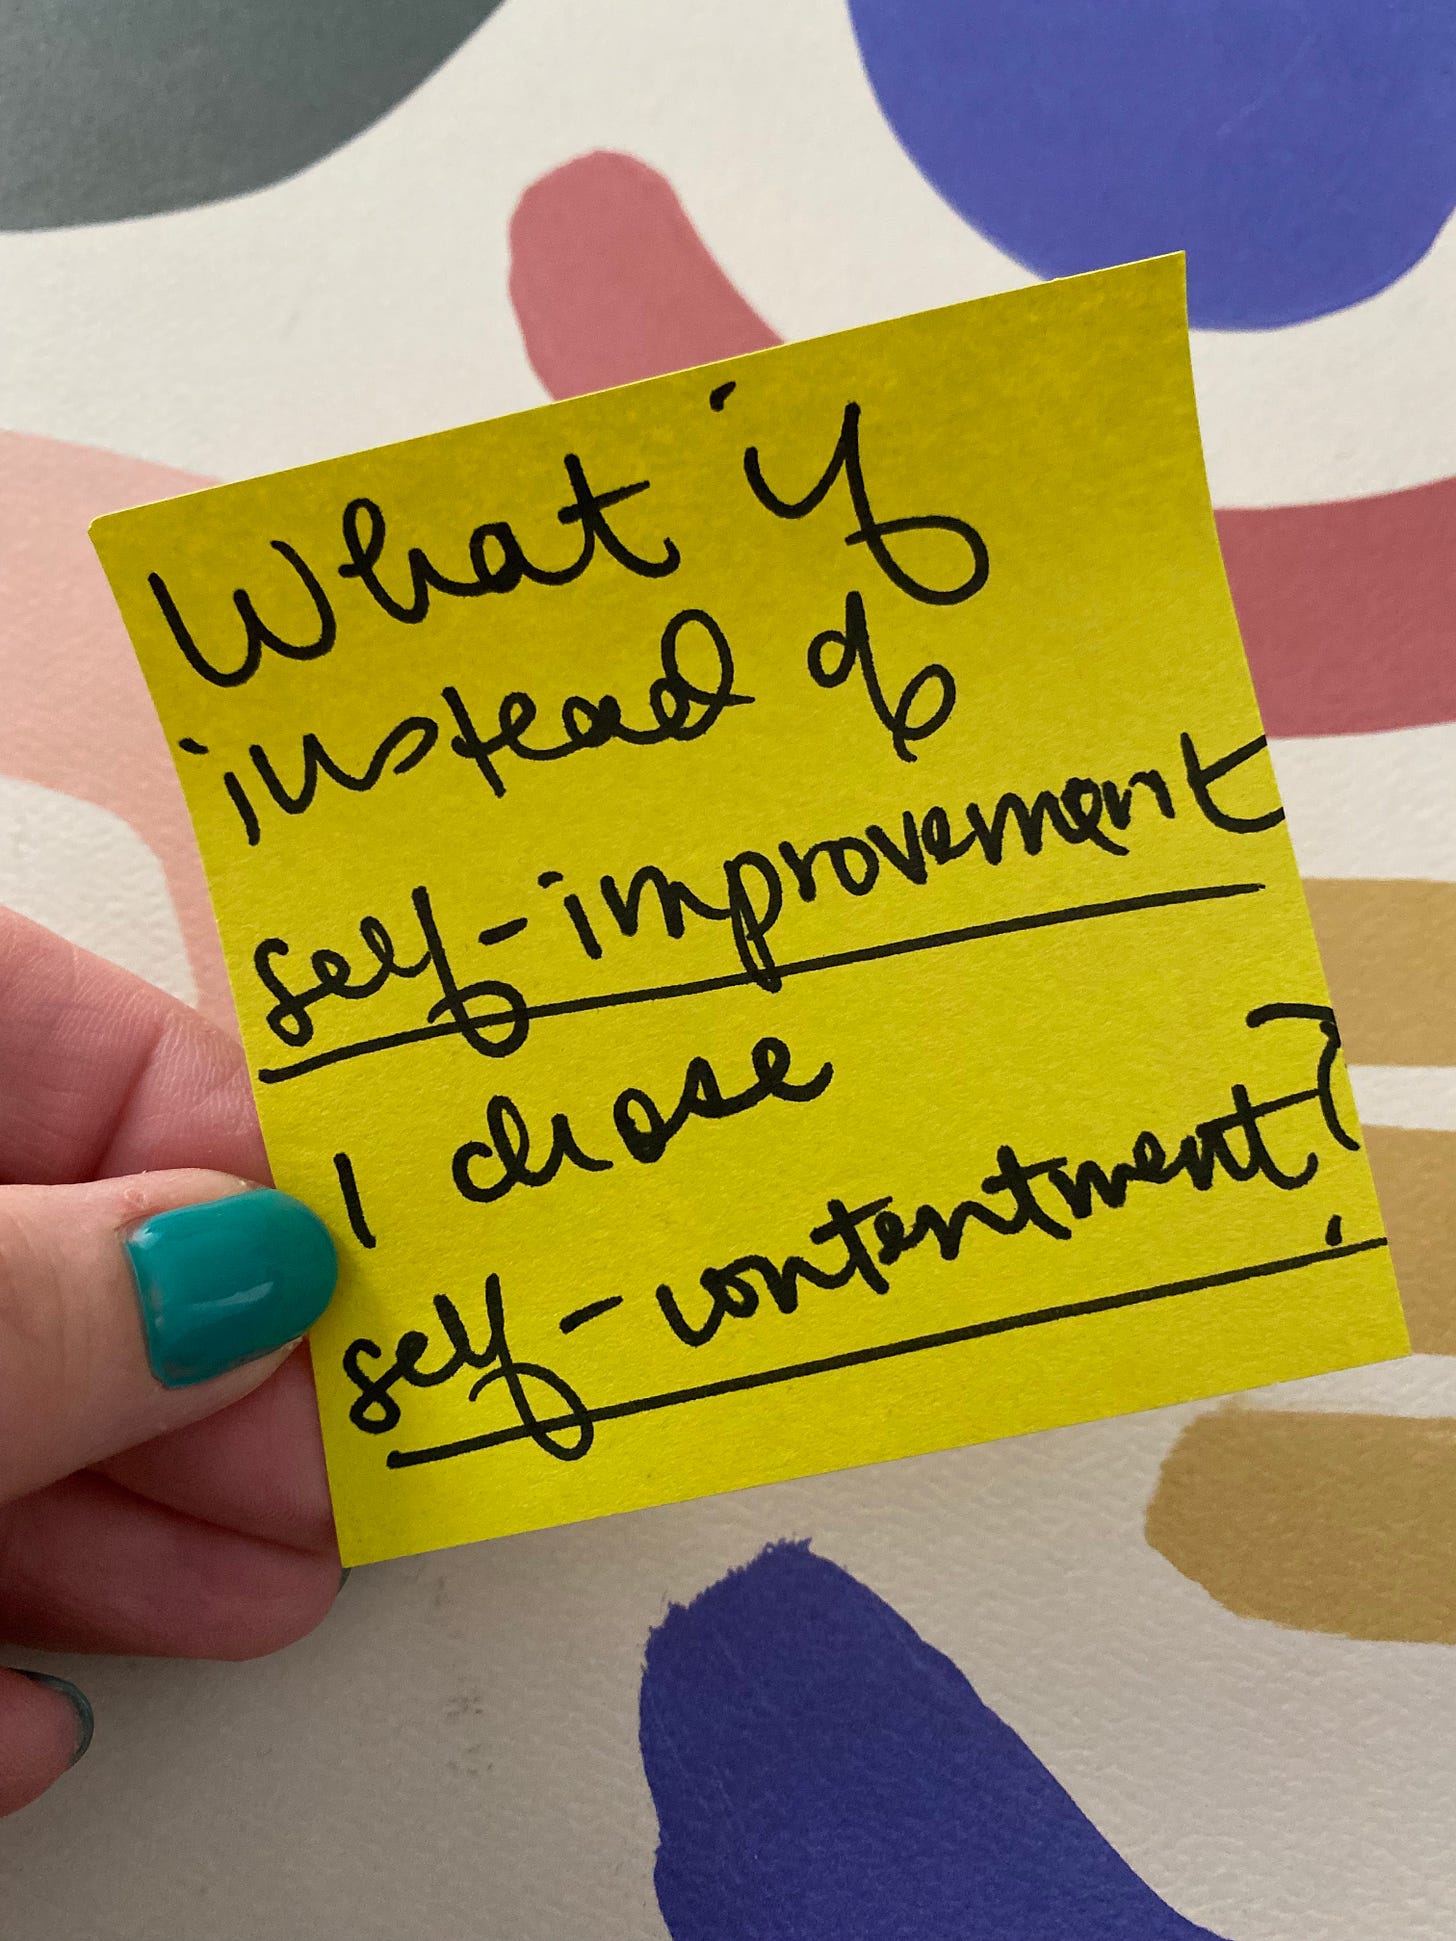 Erin holding up a yellow post it note with today's inspiration written, against a colorful background and teal nails